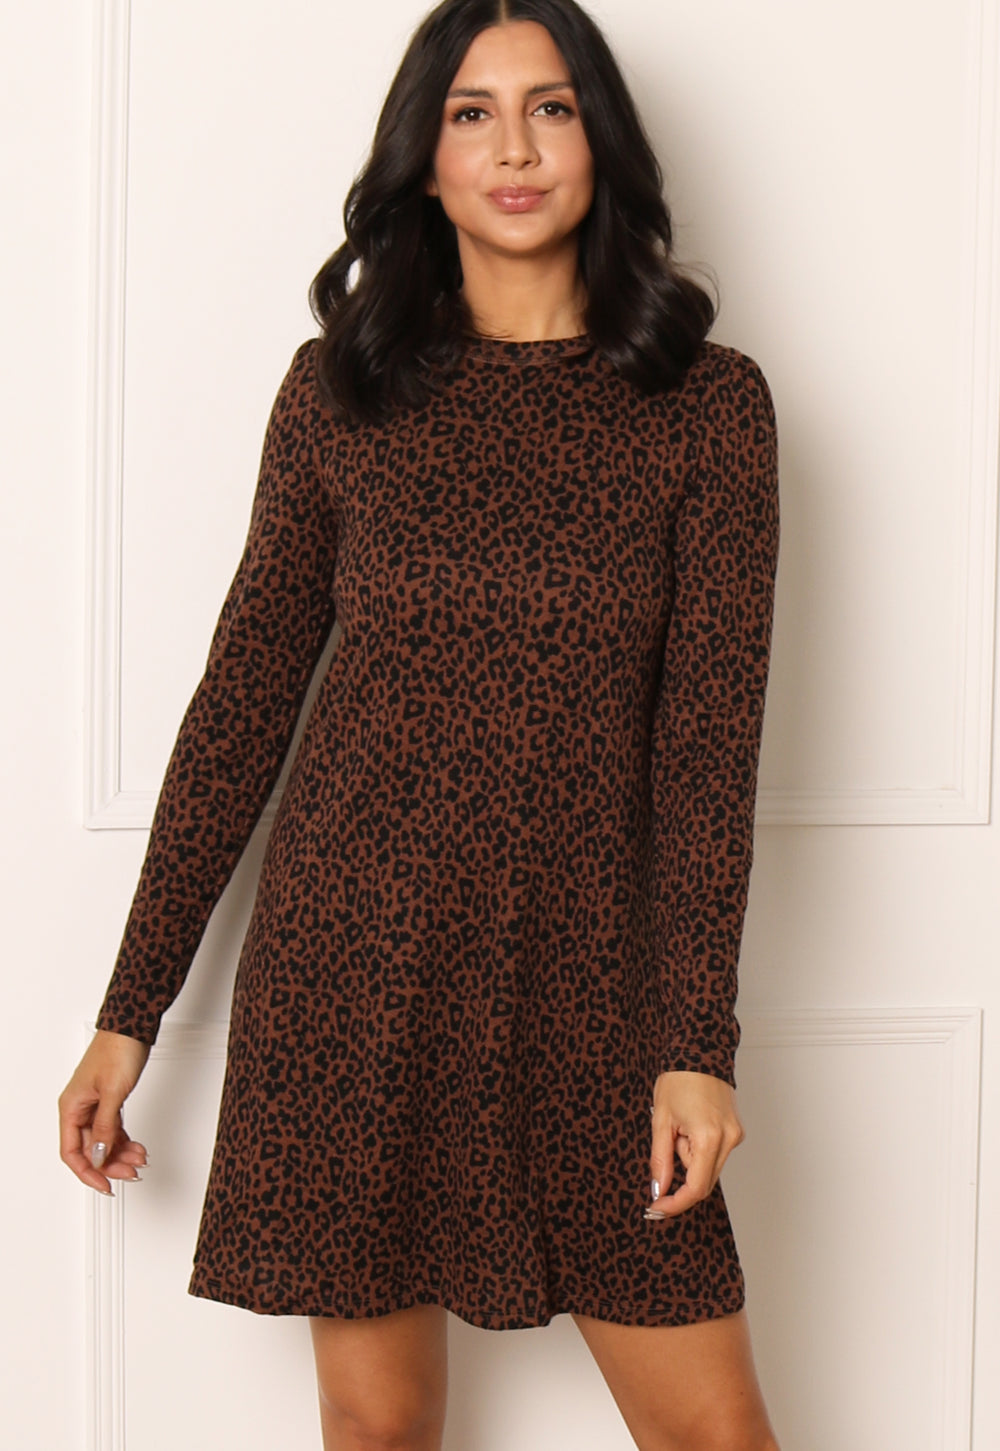 JDY Tonsy Leopard Print Swing Mini Dress in Brown & Black - One Nation Clothing